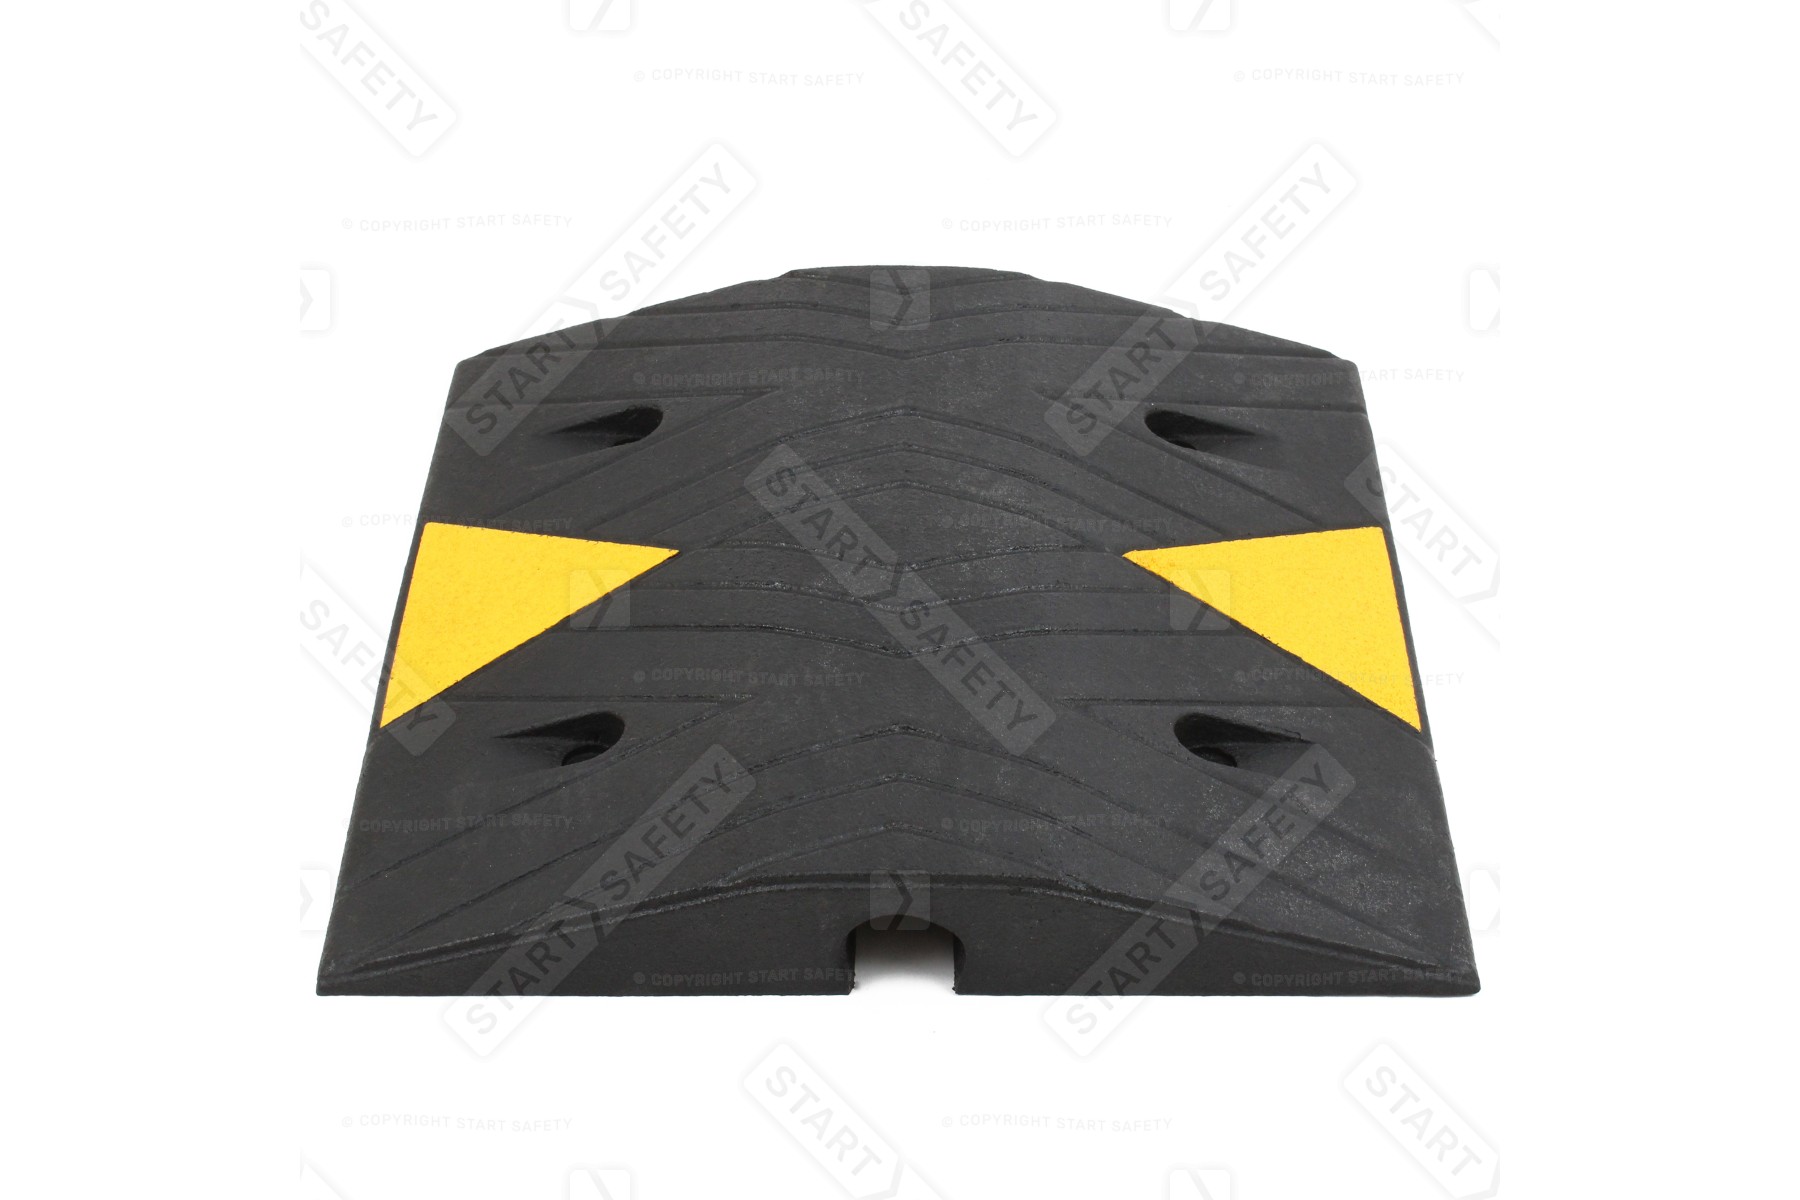 SiteCop Standard 70mm Rubber Speed Bump - Fixings Included